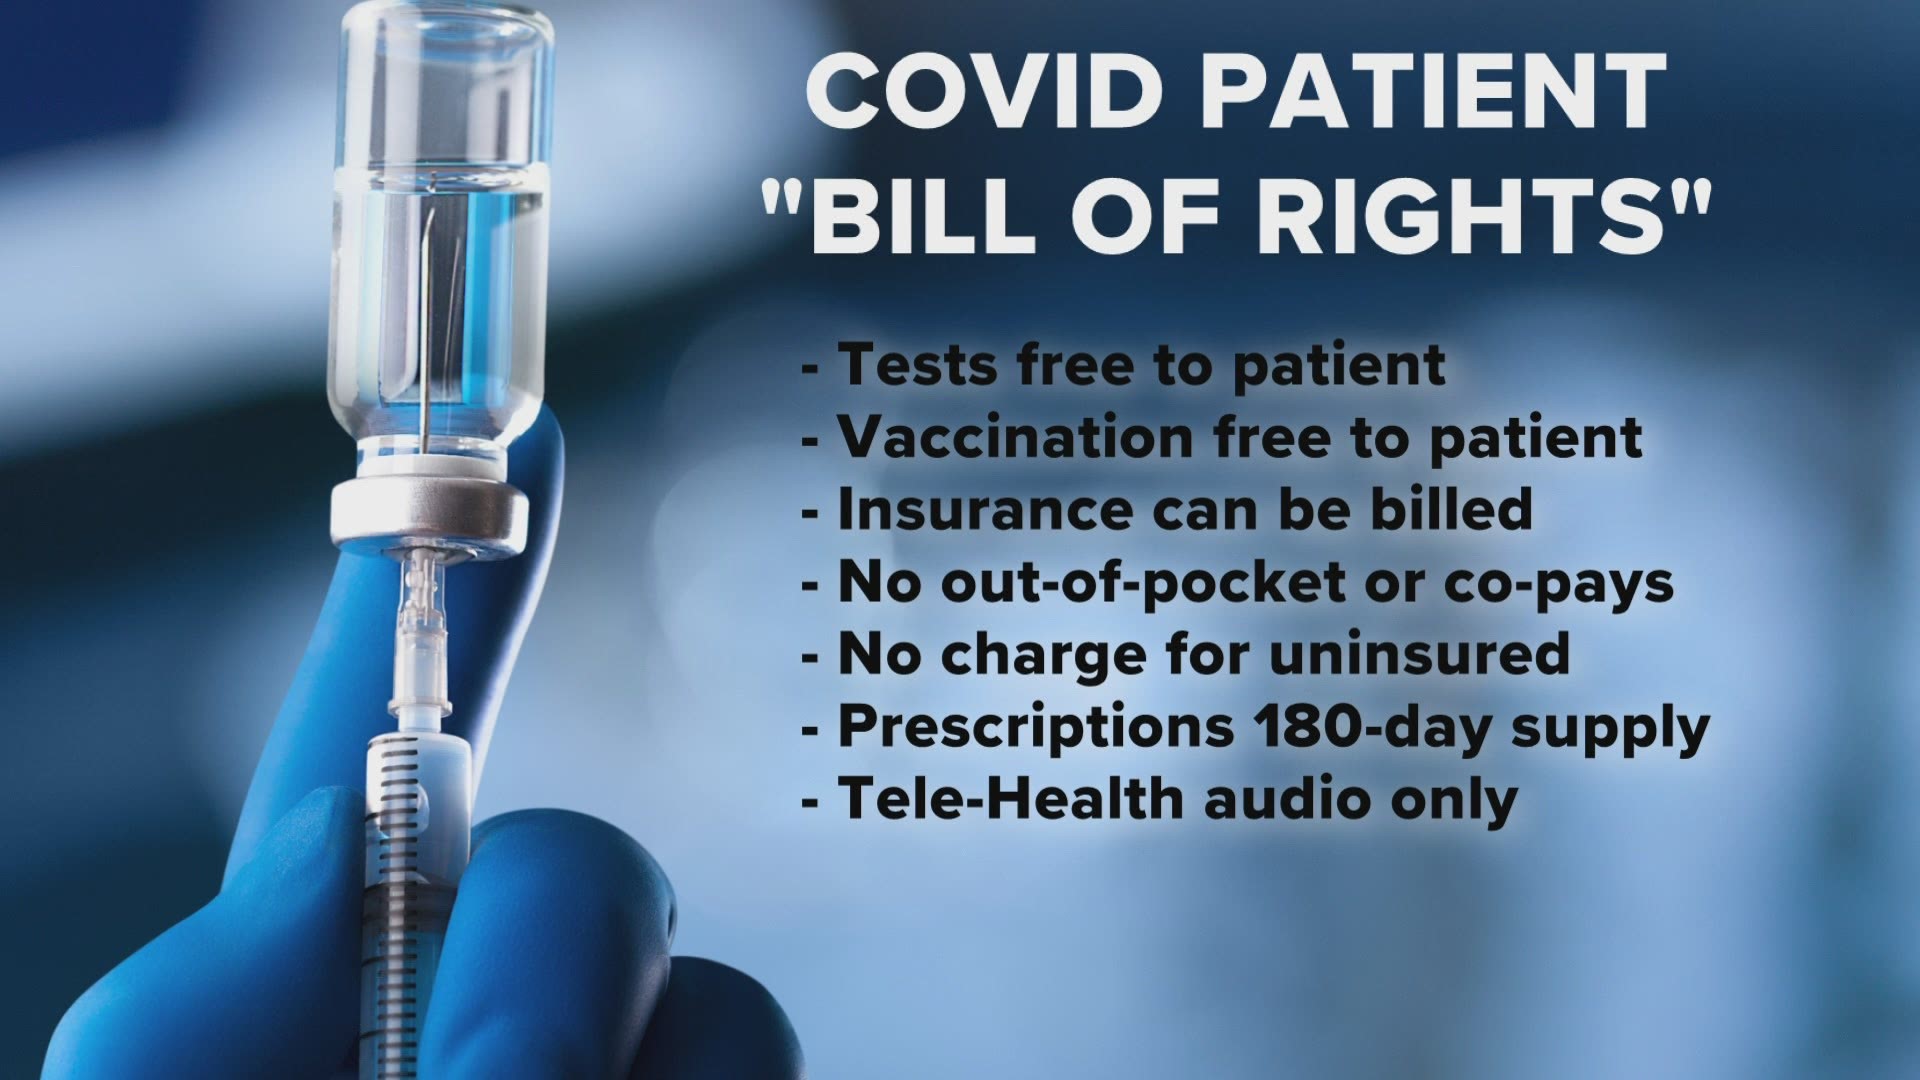 The bill, LD 1, is aimed to make sure people don't have to pay out of pocket for COVID testing or vaccinations.